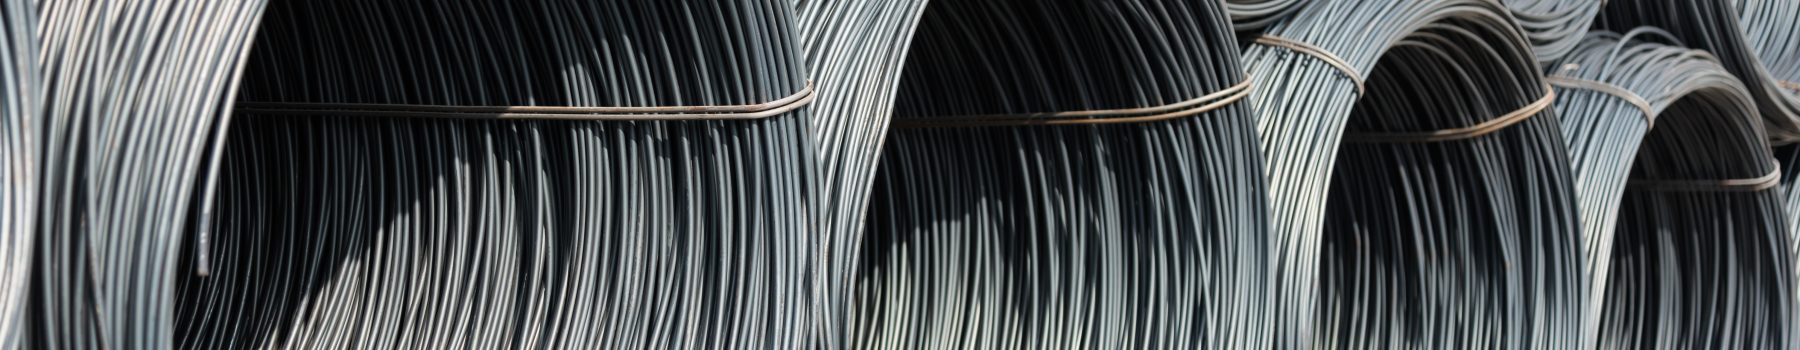 Pile Of Wire Rod Or Coil For Industrial Usage